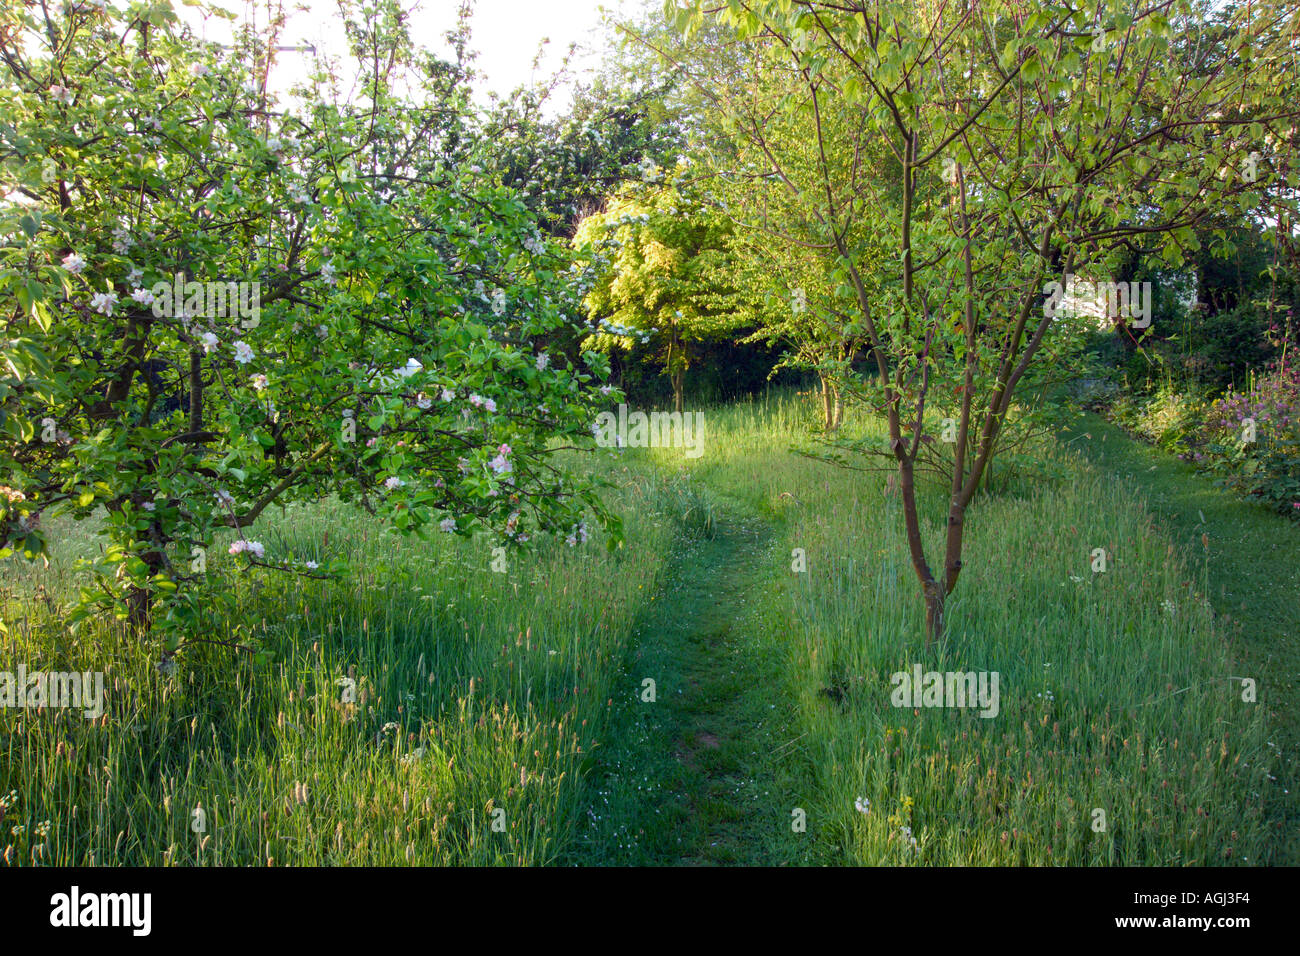 Summer Cottage Mown Path Through Long Grass In Orchard Stock Photo